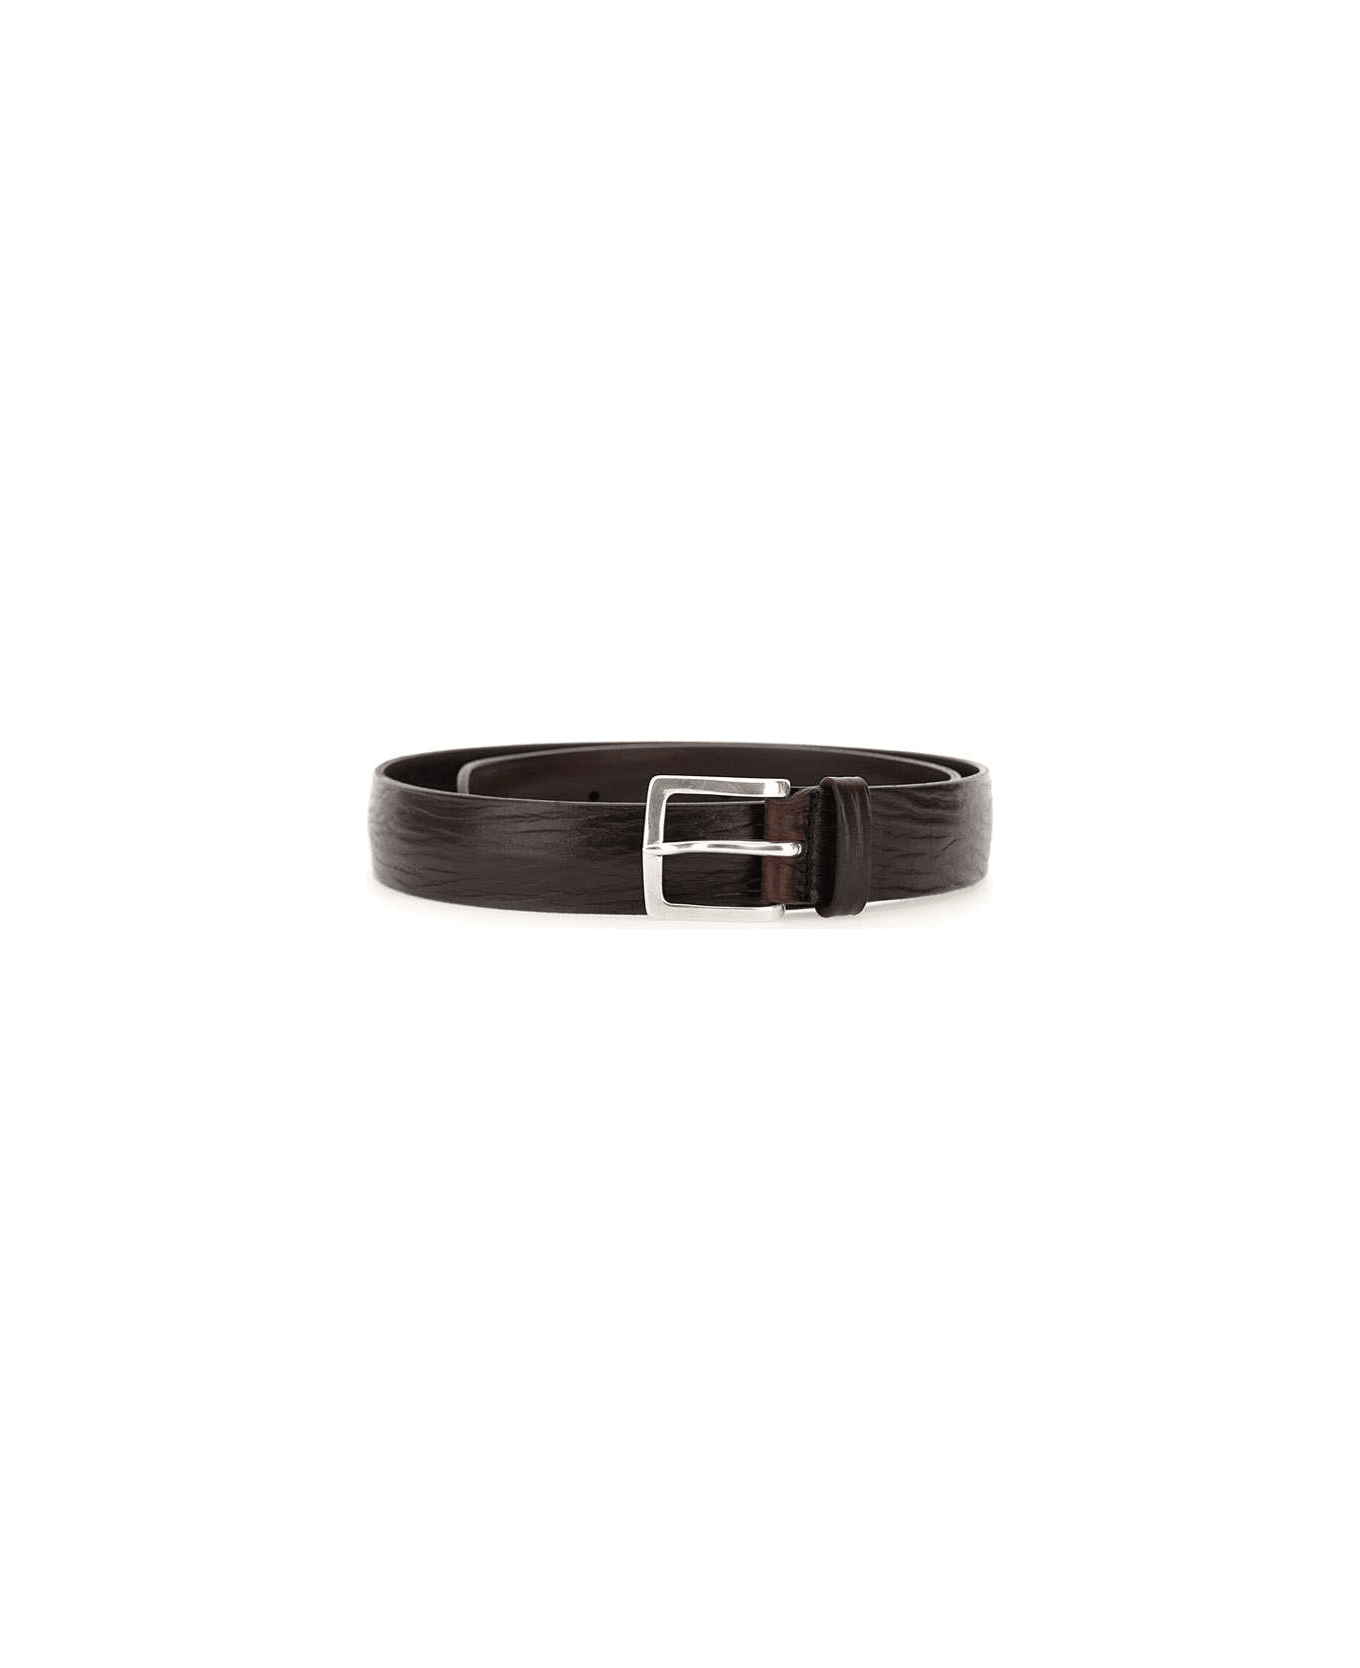 Orciani "blade" Leather Belt - BROWN